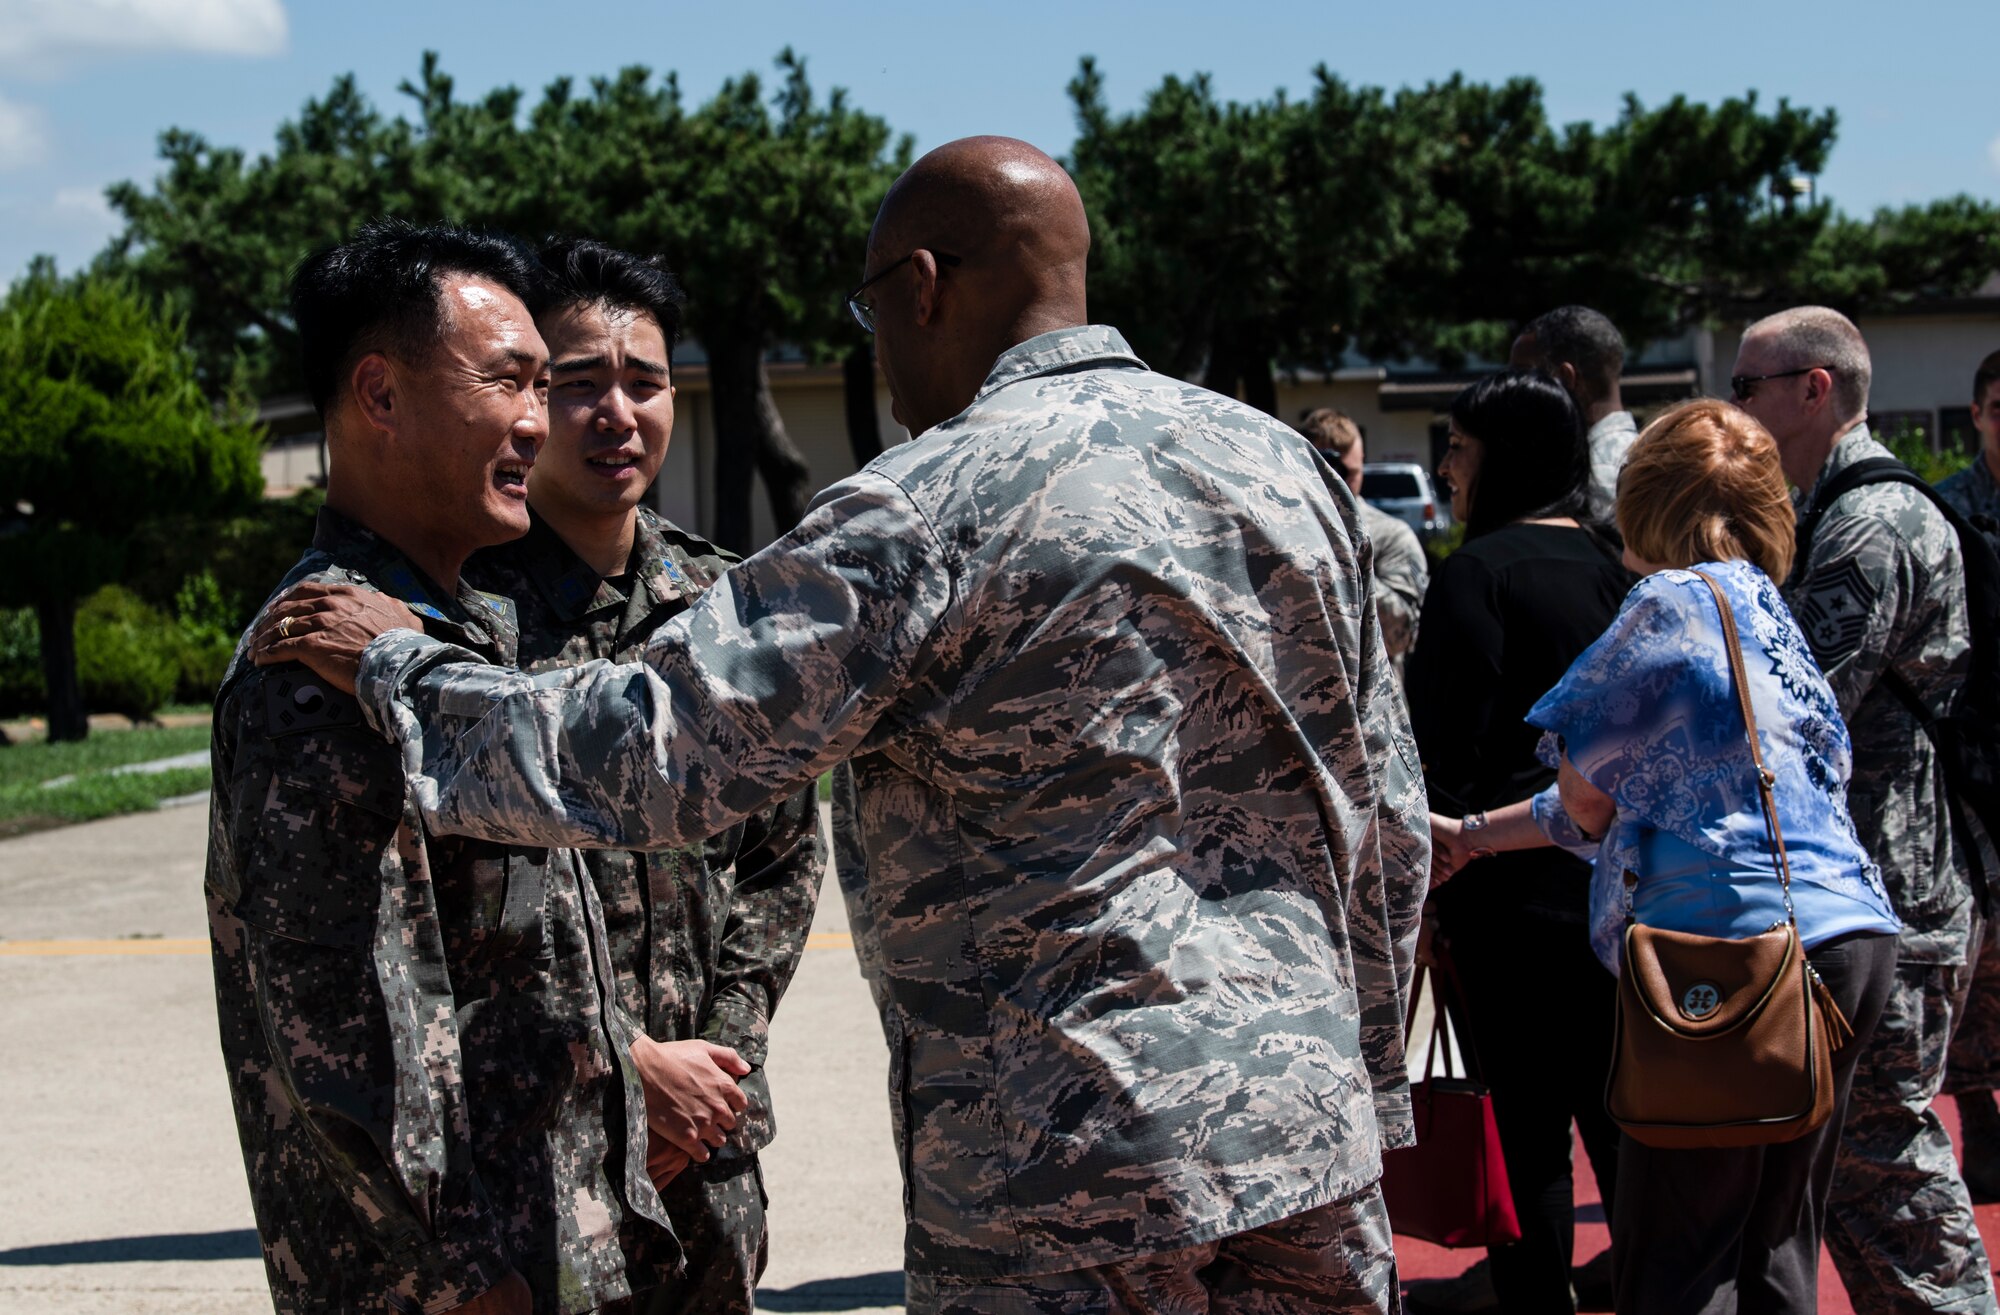 U.S. Air Force Gen. CQ Brown, Jr., Pacific Air Forces commander, converses with leadership from the Republic of Korea Air Force’s 38th Fighter Group during his visit to Kunsan Air Base, Republic of Korea, Aug. 29, 2018. Brown spoke highly of the continued U.S.-ROKAF relationship during his visit to the base. (U.S. Air Force photo by Senior Airman Stefan Alvarez)